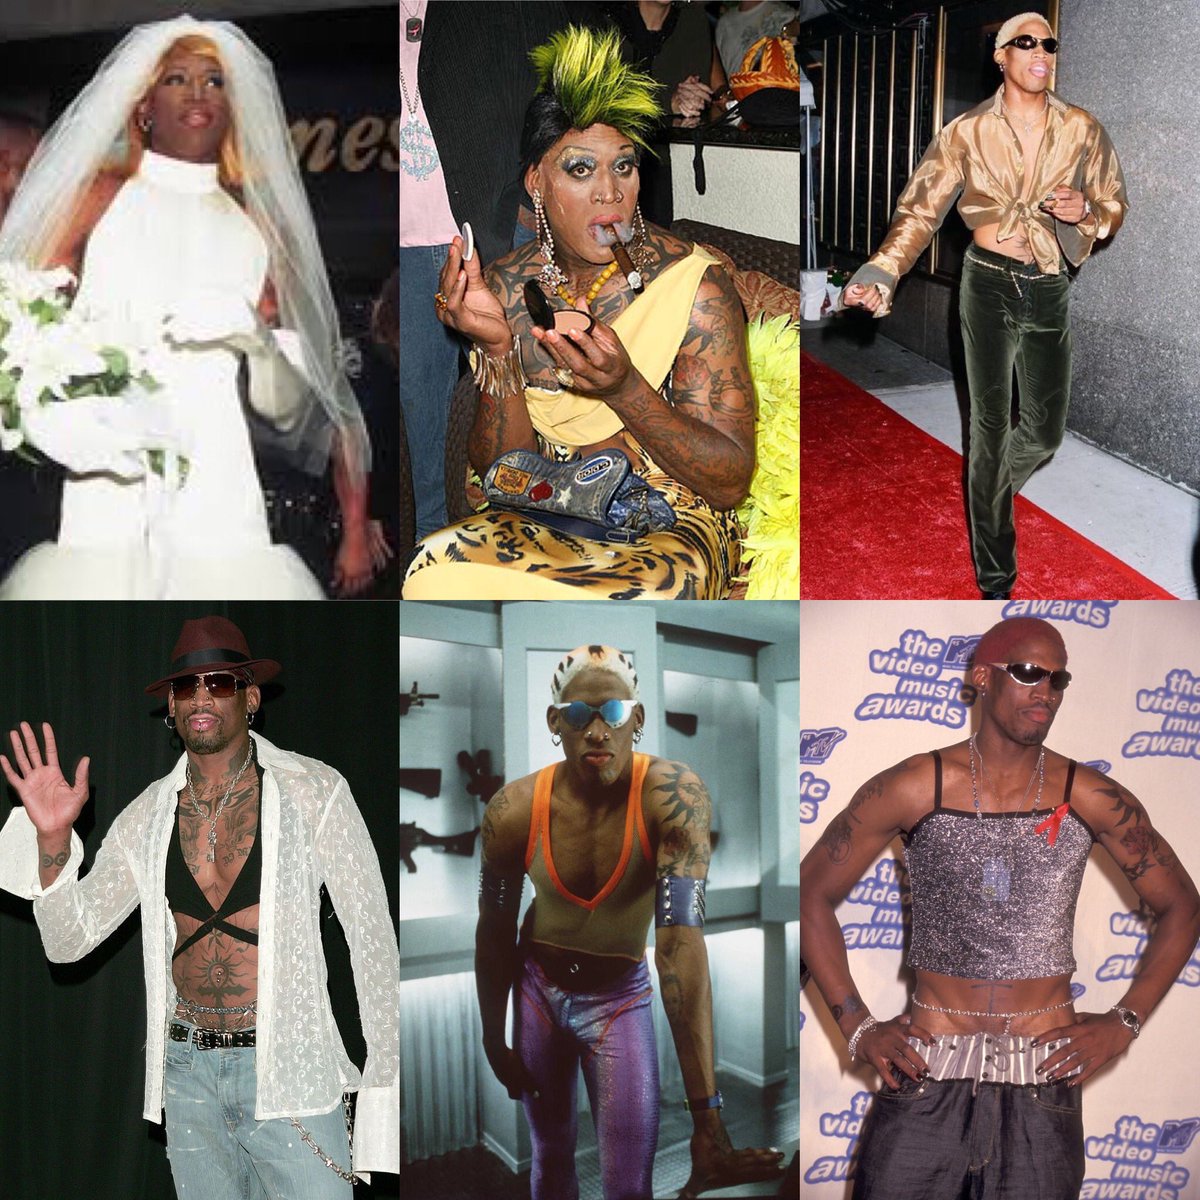 Curated Creative On Twitter We Talking Bout This Dennis Rodman Coz